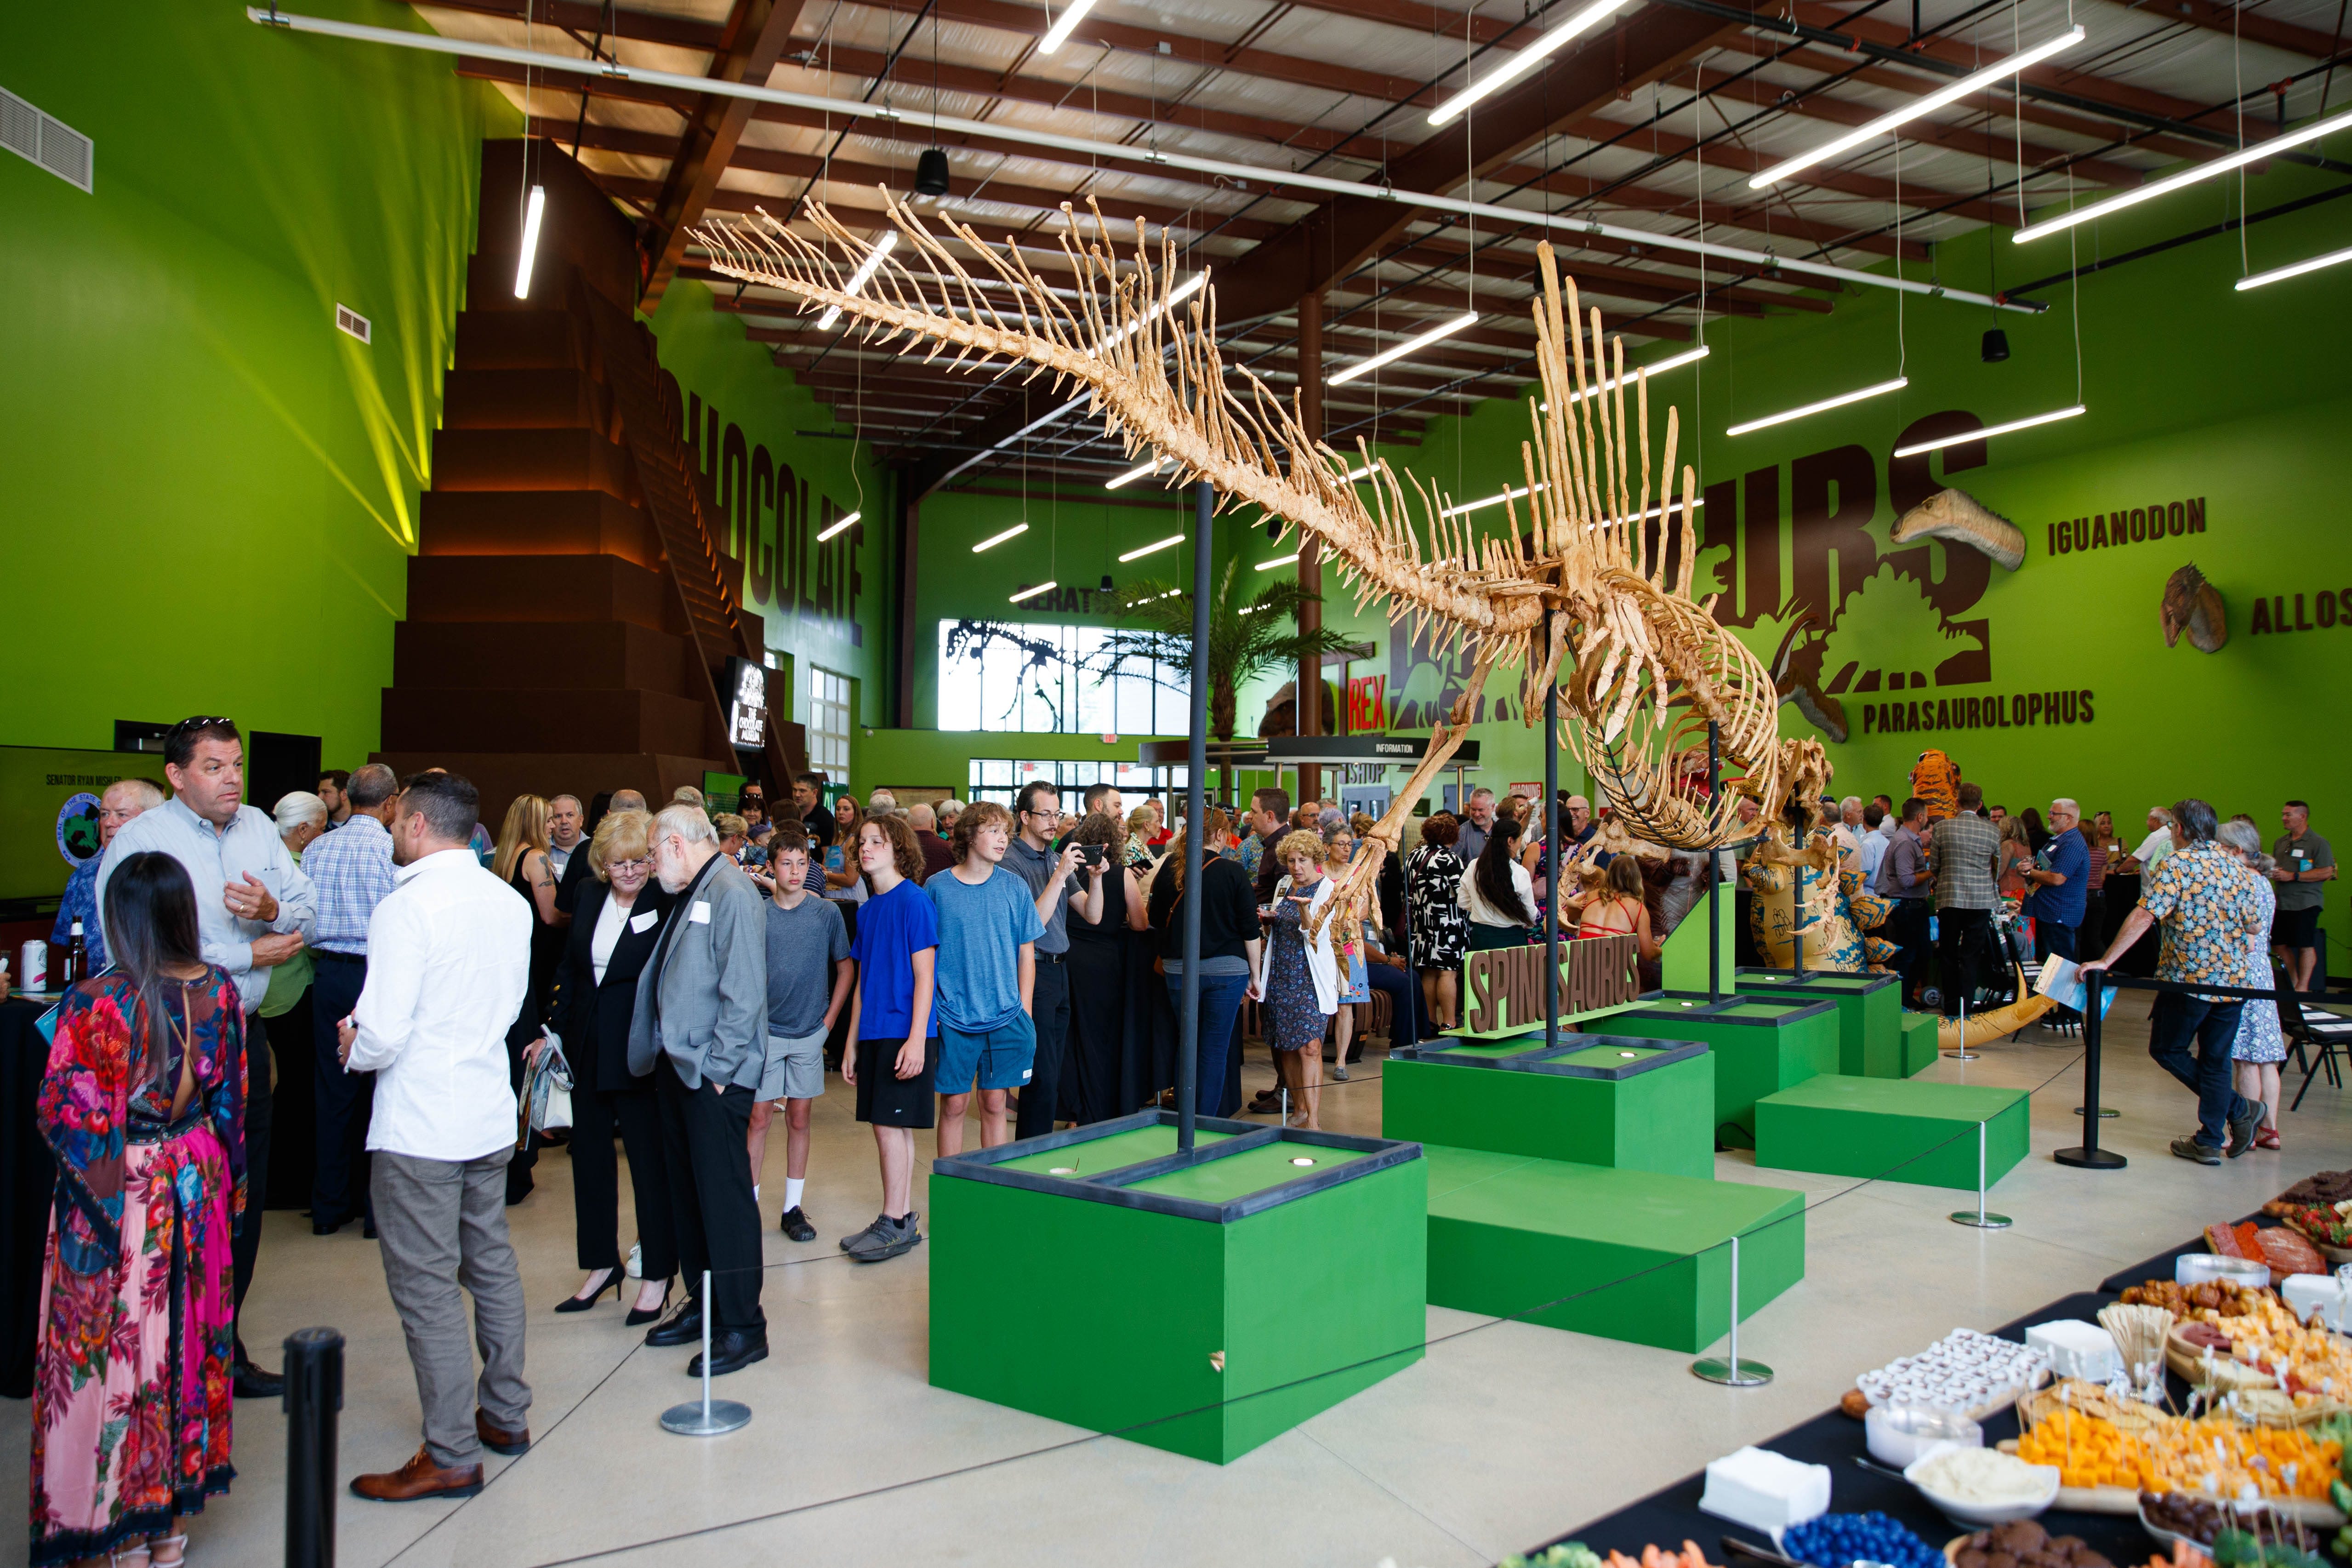 Indiana's first lady, South Bend's mayor, hundreds turn out for dinosaur museum's opening